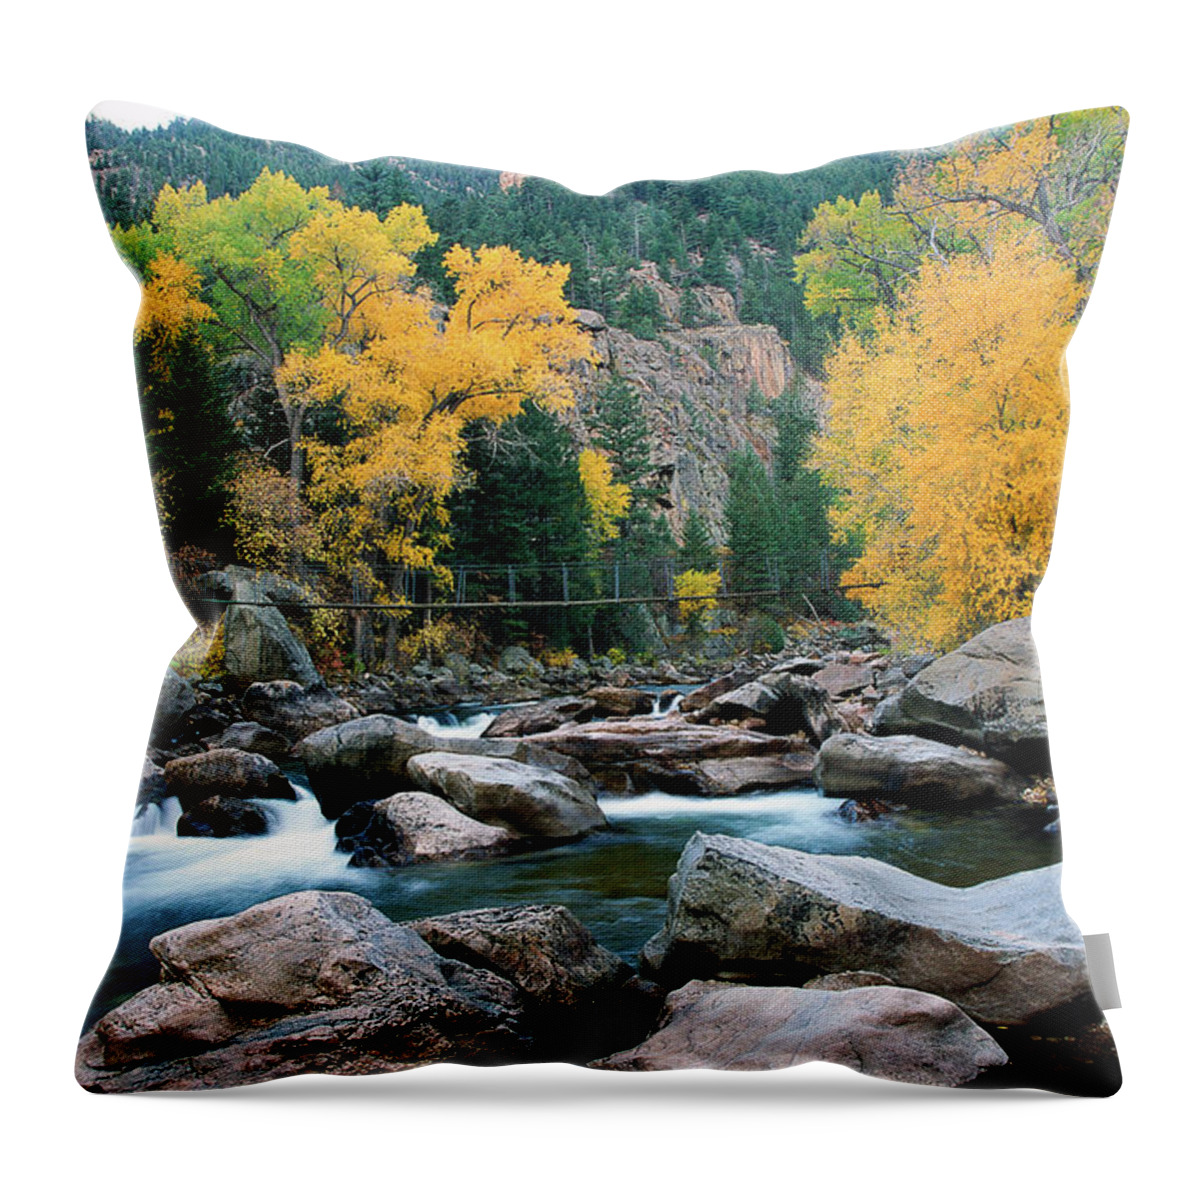 Colorado Throw Pillow featuring the photograph Poudre Gold by Jim Benest